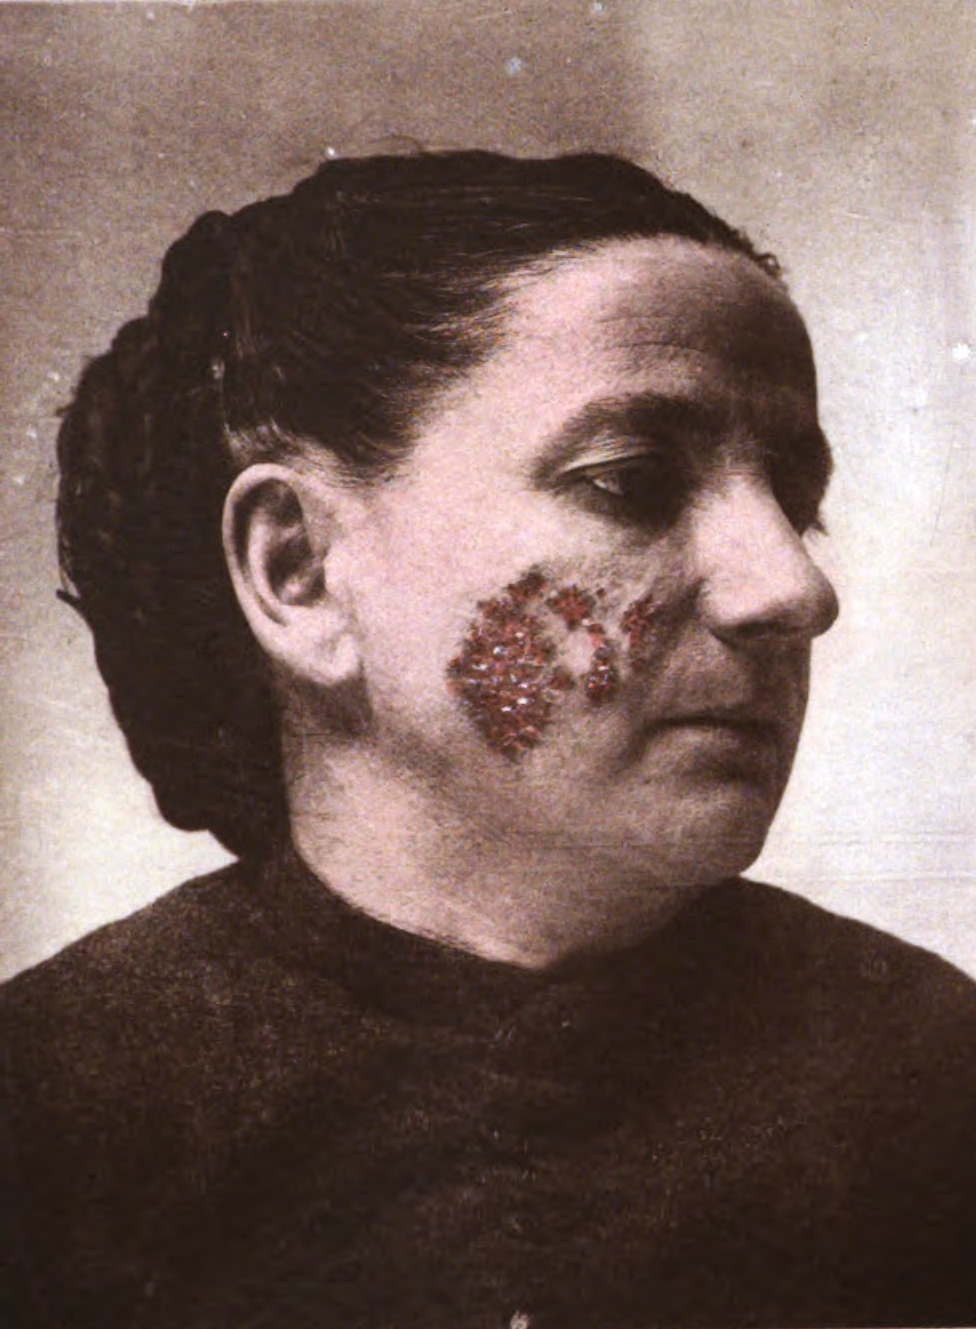 Lupus vulgaris in a woman in the 19th century